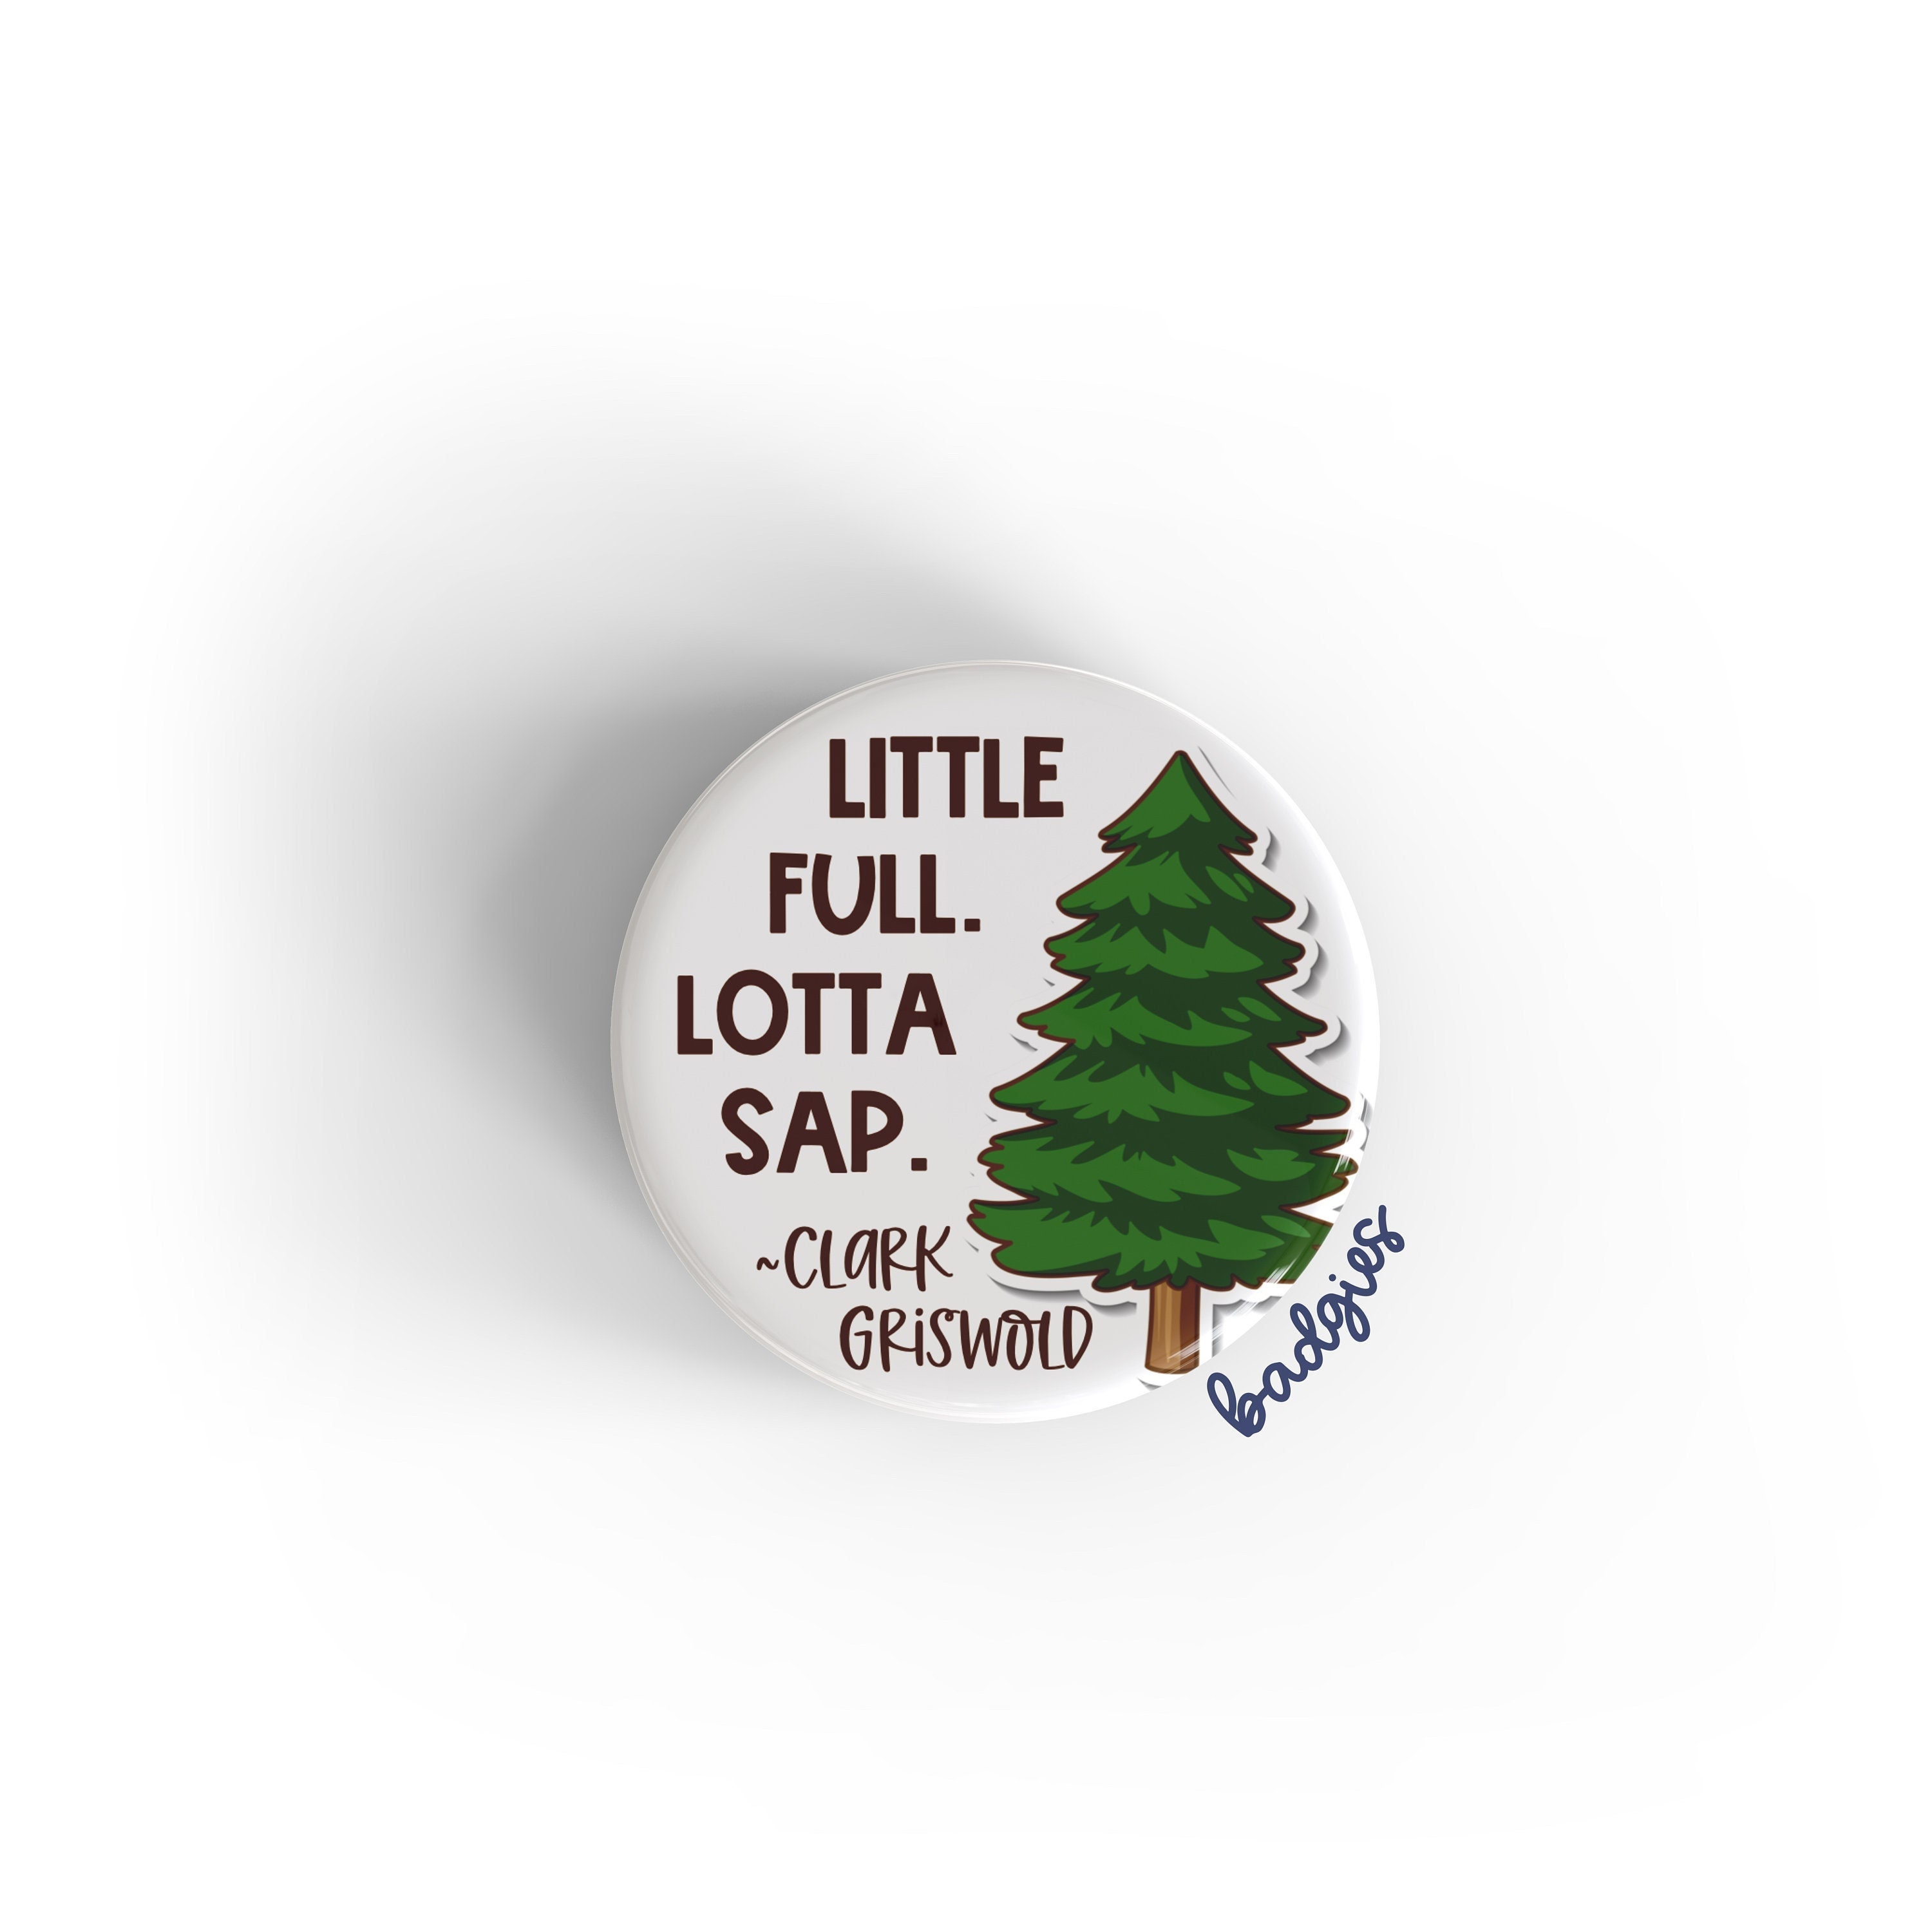 Little Full Lotta Sap badgie, National Lampoon's Badge Reel Cover, Funny Christmas Vacation Nurse Gift, Clark Griswold, ER, Ed, Oncology, PT